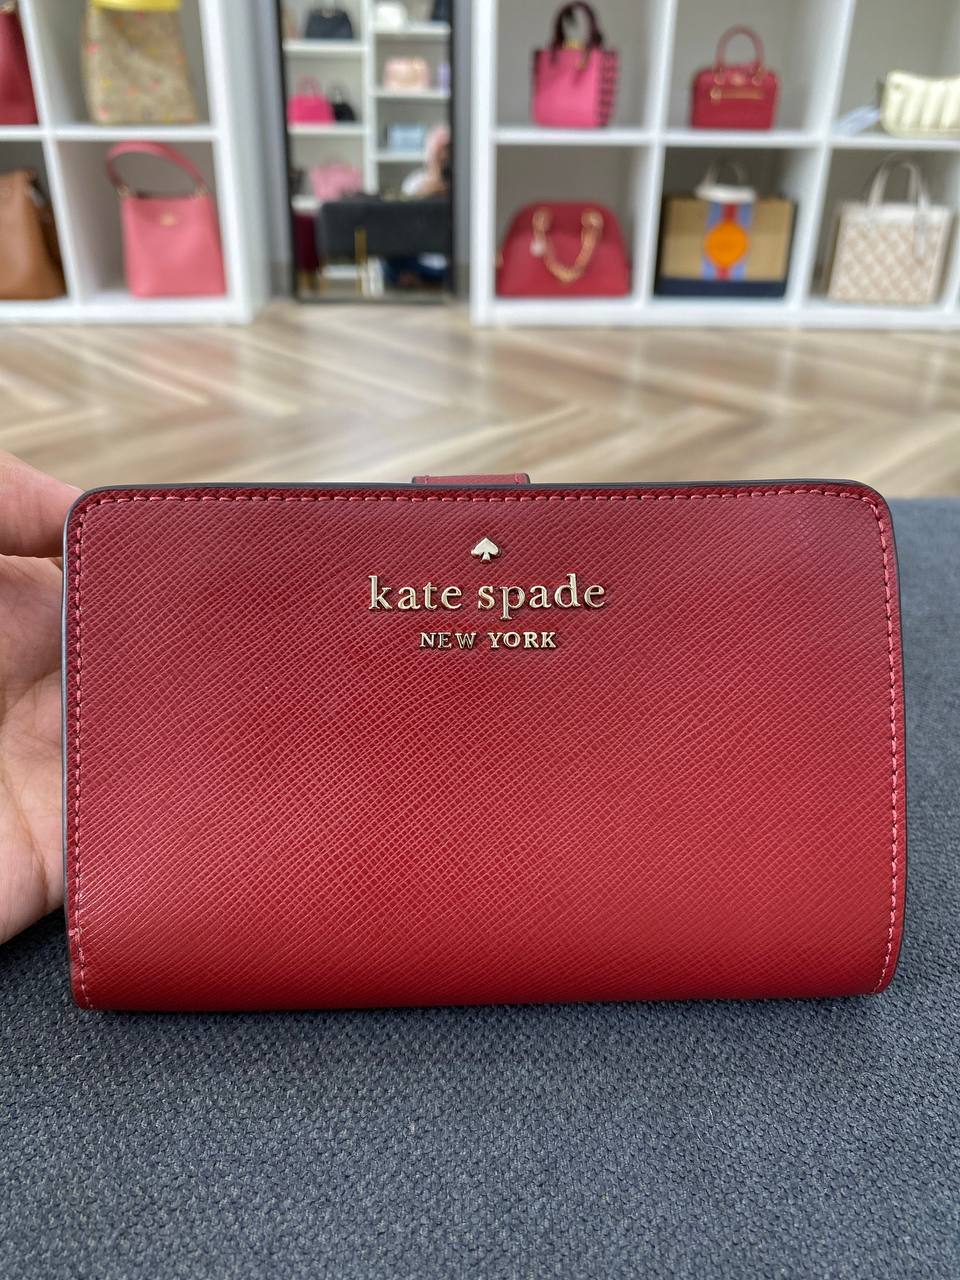 KATE SPADE STACI MEDIUM SAFFIANO COMPACT BIFOLD WALLET IN RED CURRANT